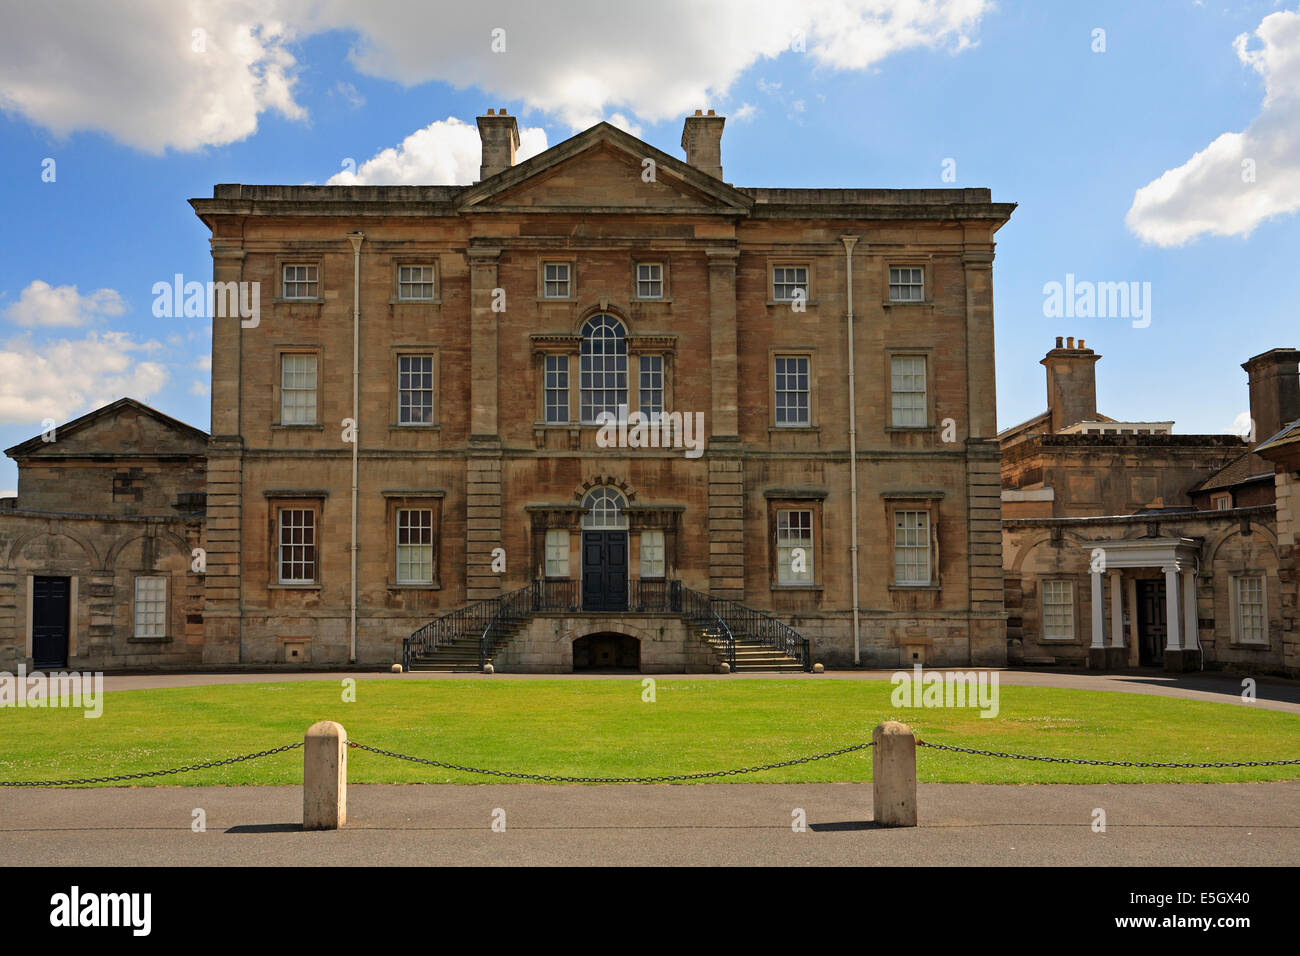 Cusworth Hall and Park, Doncaster, South Yorkshire, England, UK. Stock Photo